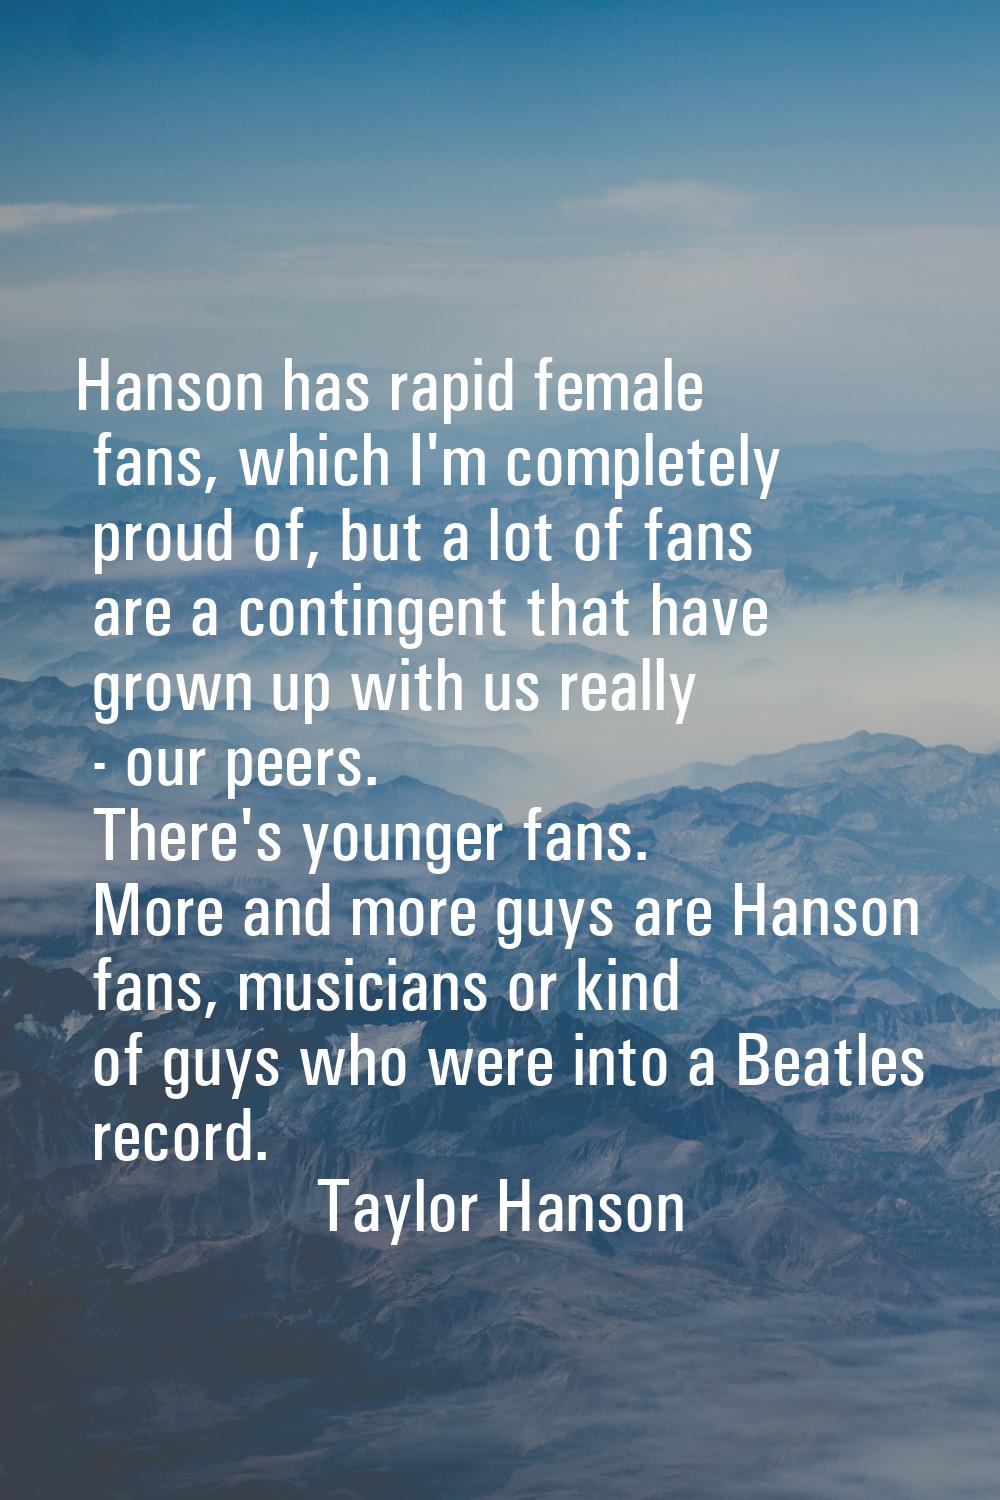 Hanson has rapid female fans, which I'm completely proud of, but a lot of fans are a contingent tha